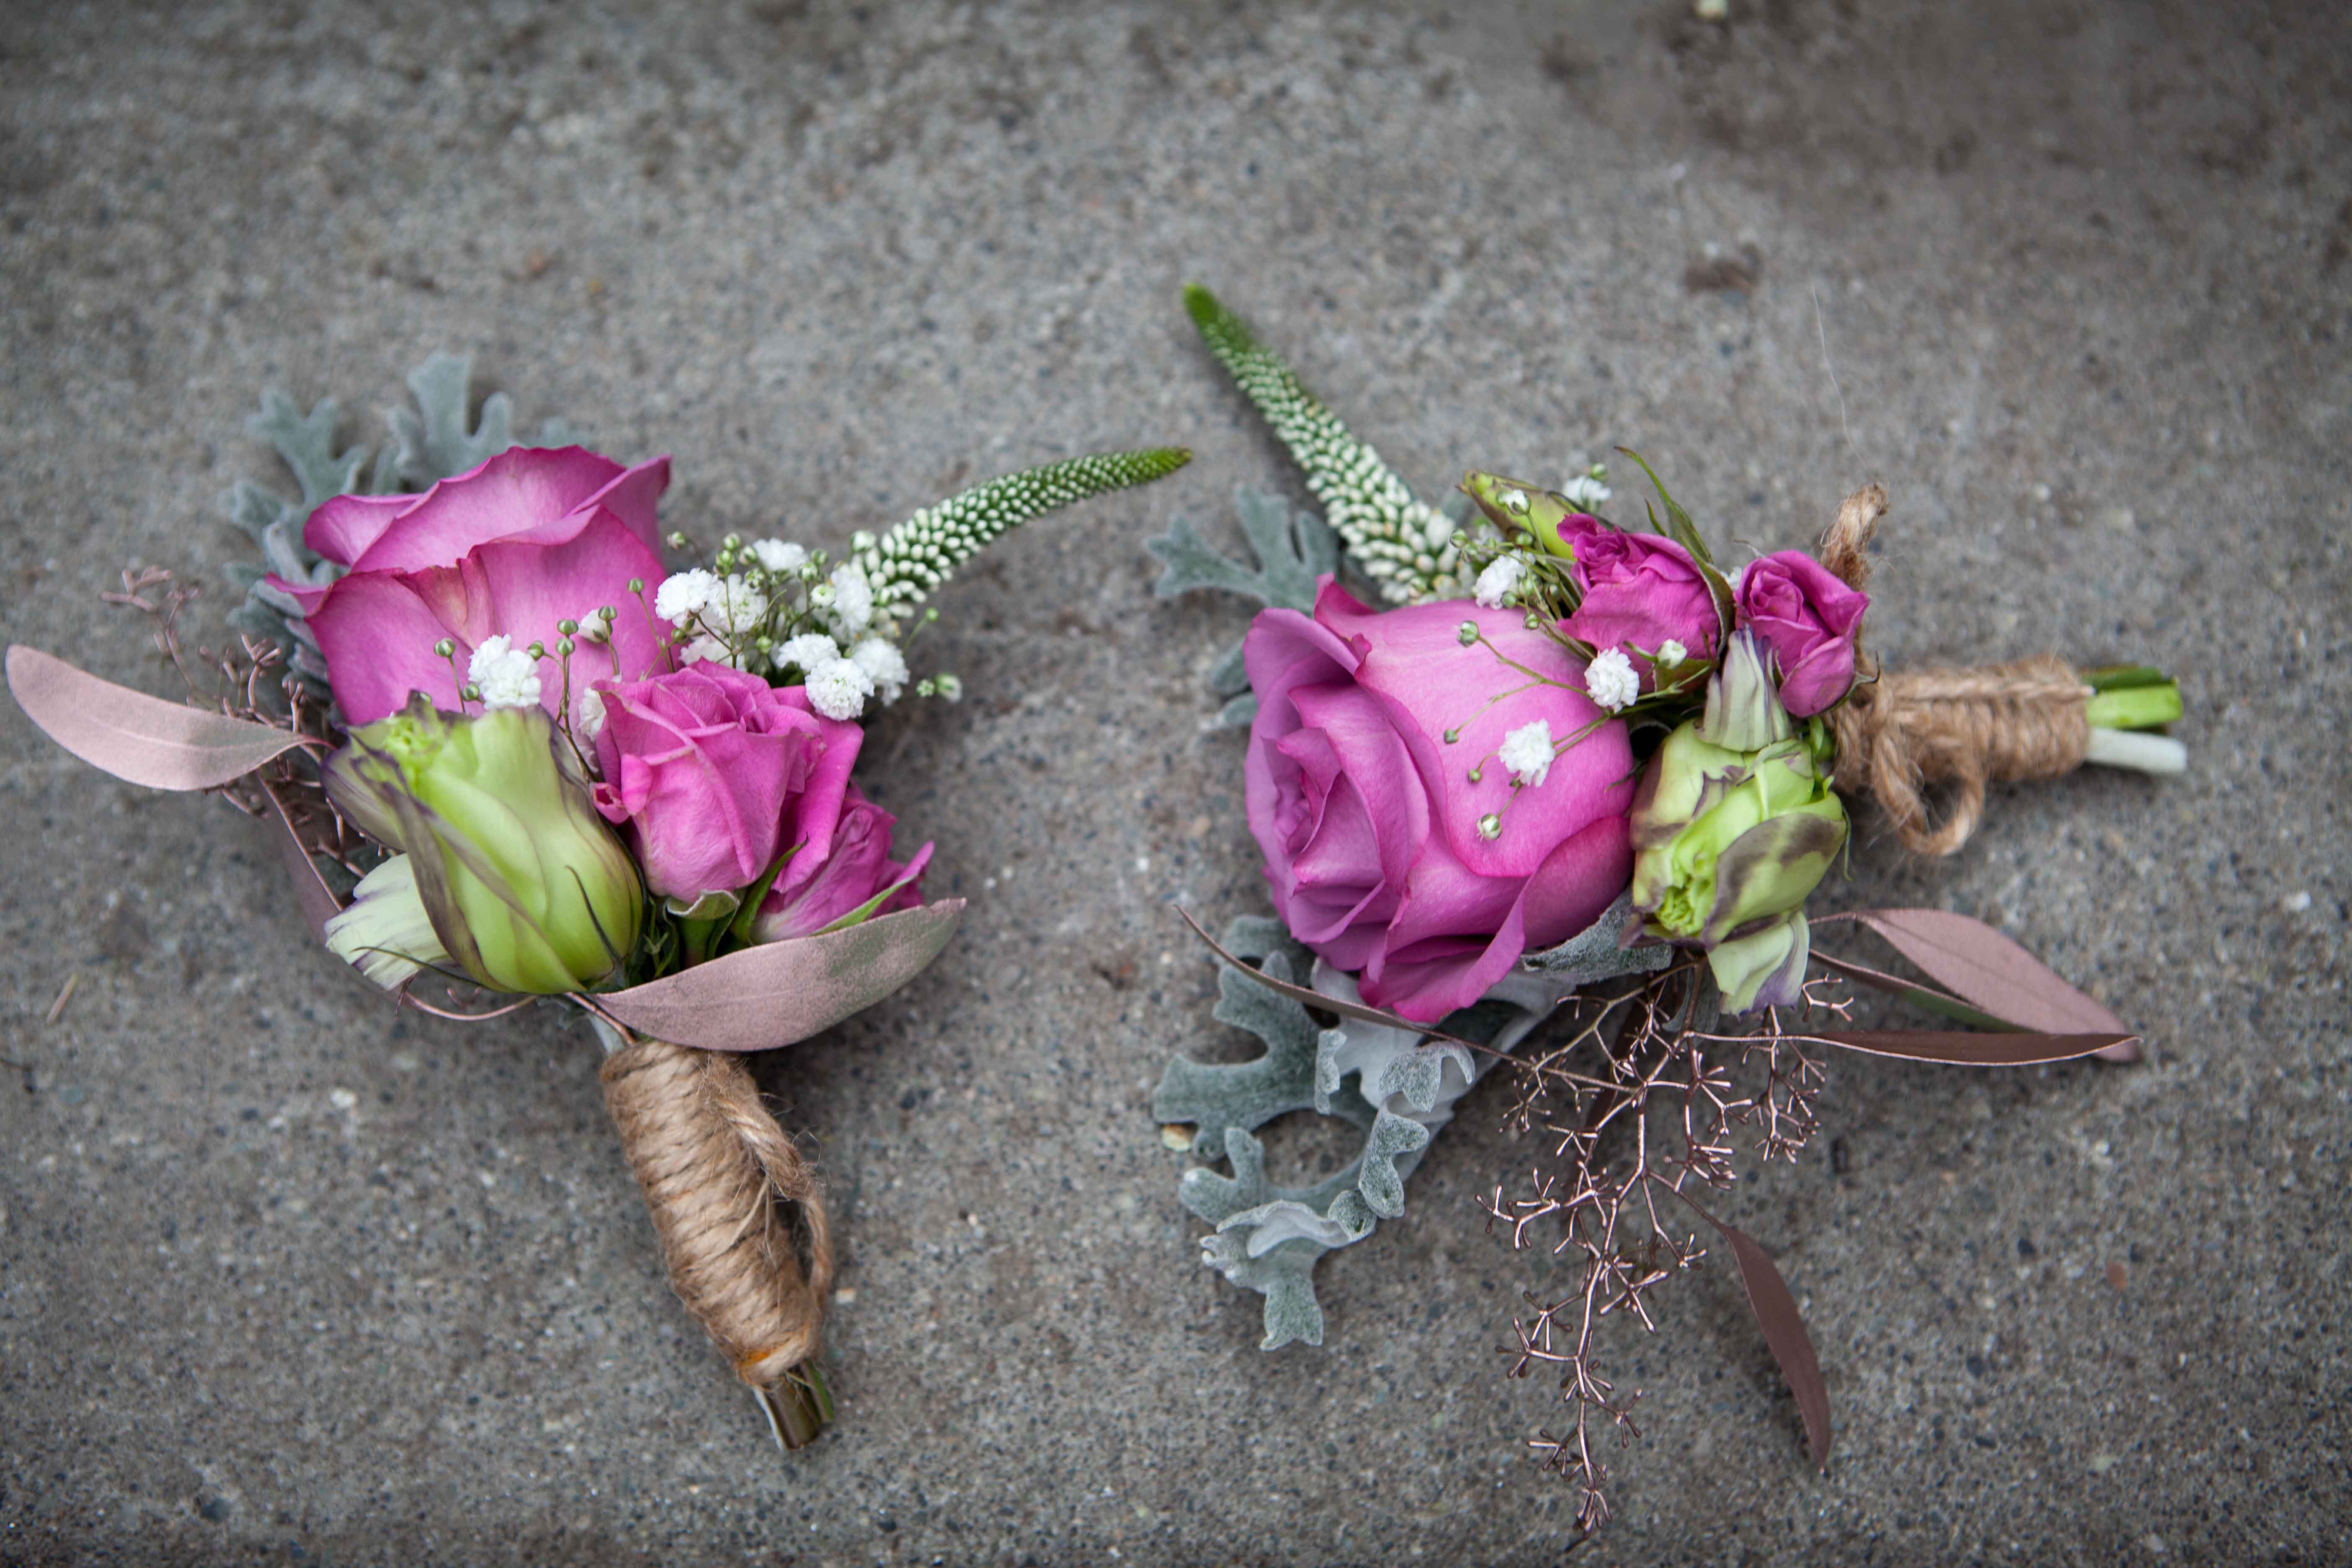 boutonnieres with purple roses, dusty miller and white veronica | designed by Natasha Price of Paper Peony Alaska